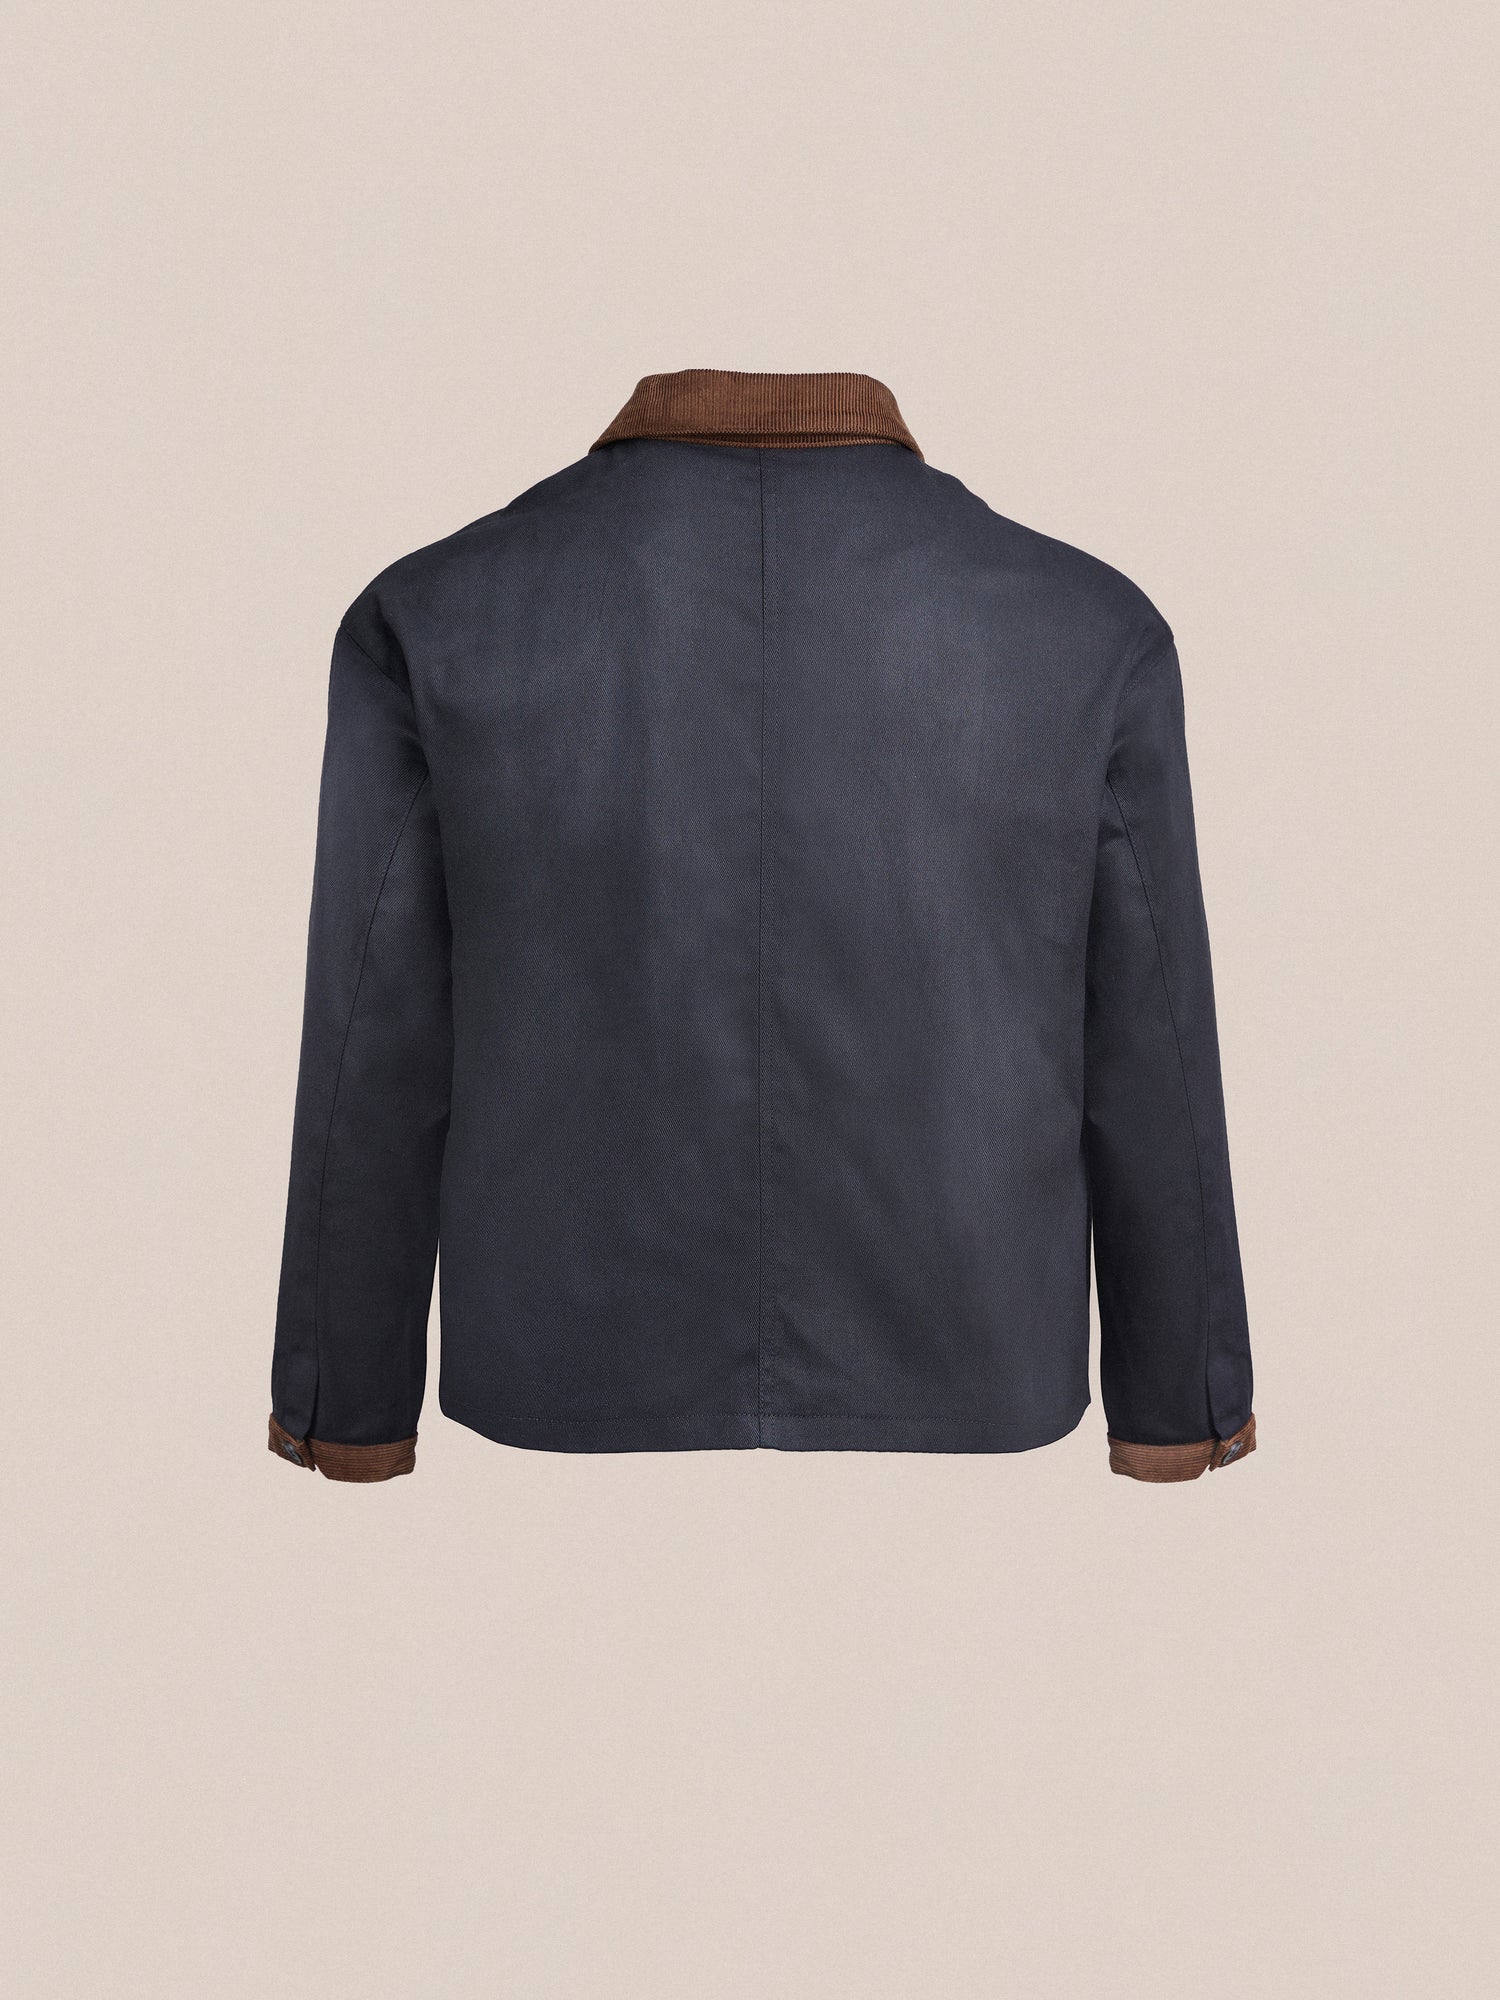 The back view of a blue Lar Waxed Cotton Box Coat with brown detailing by Found.